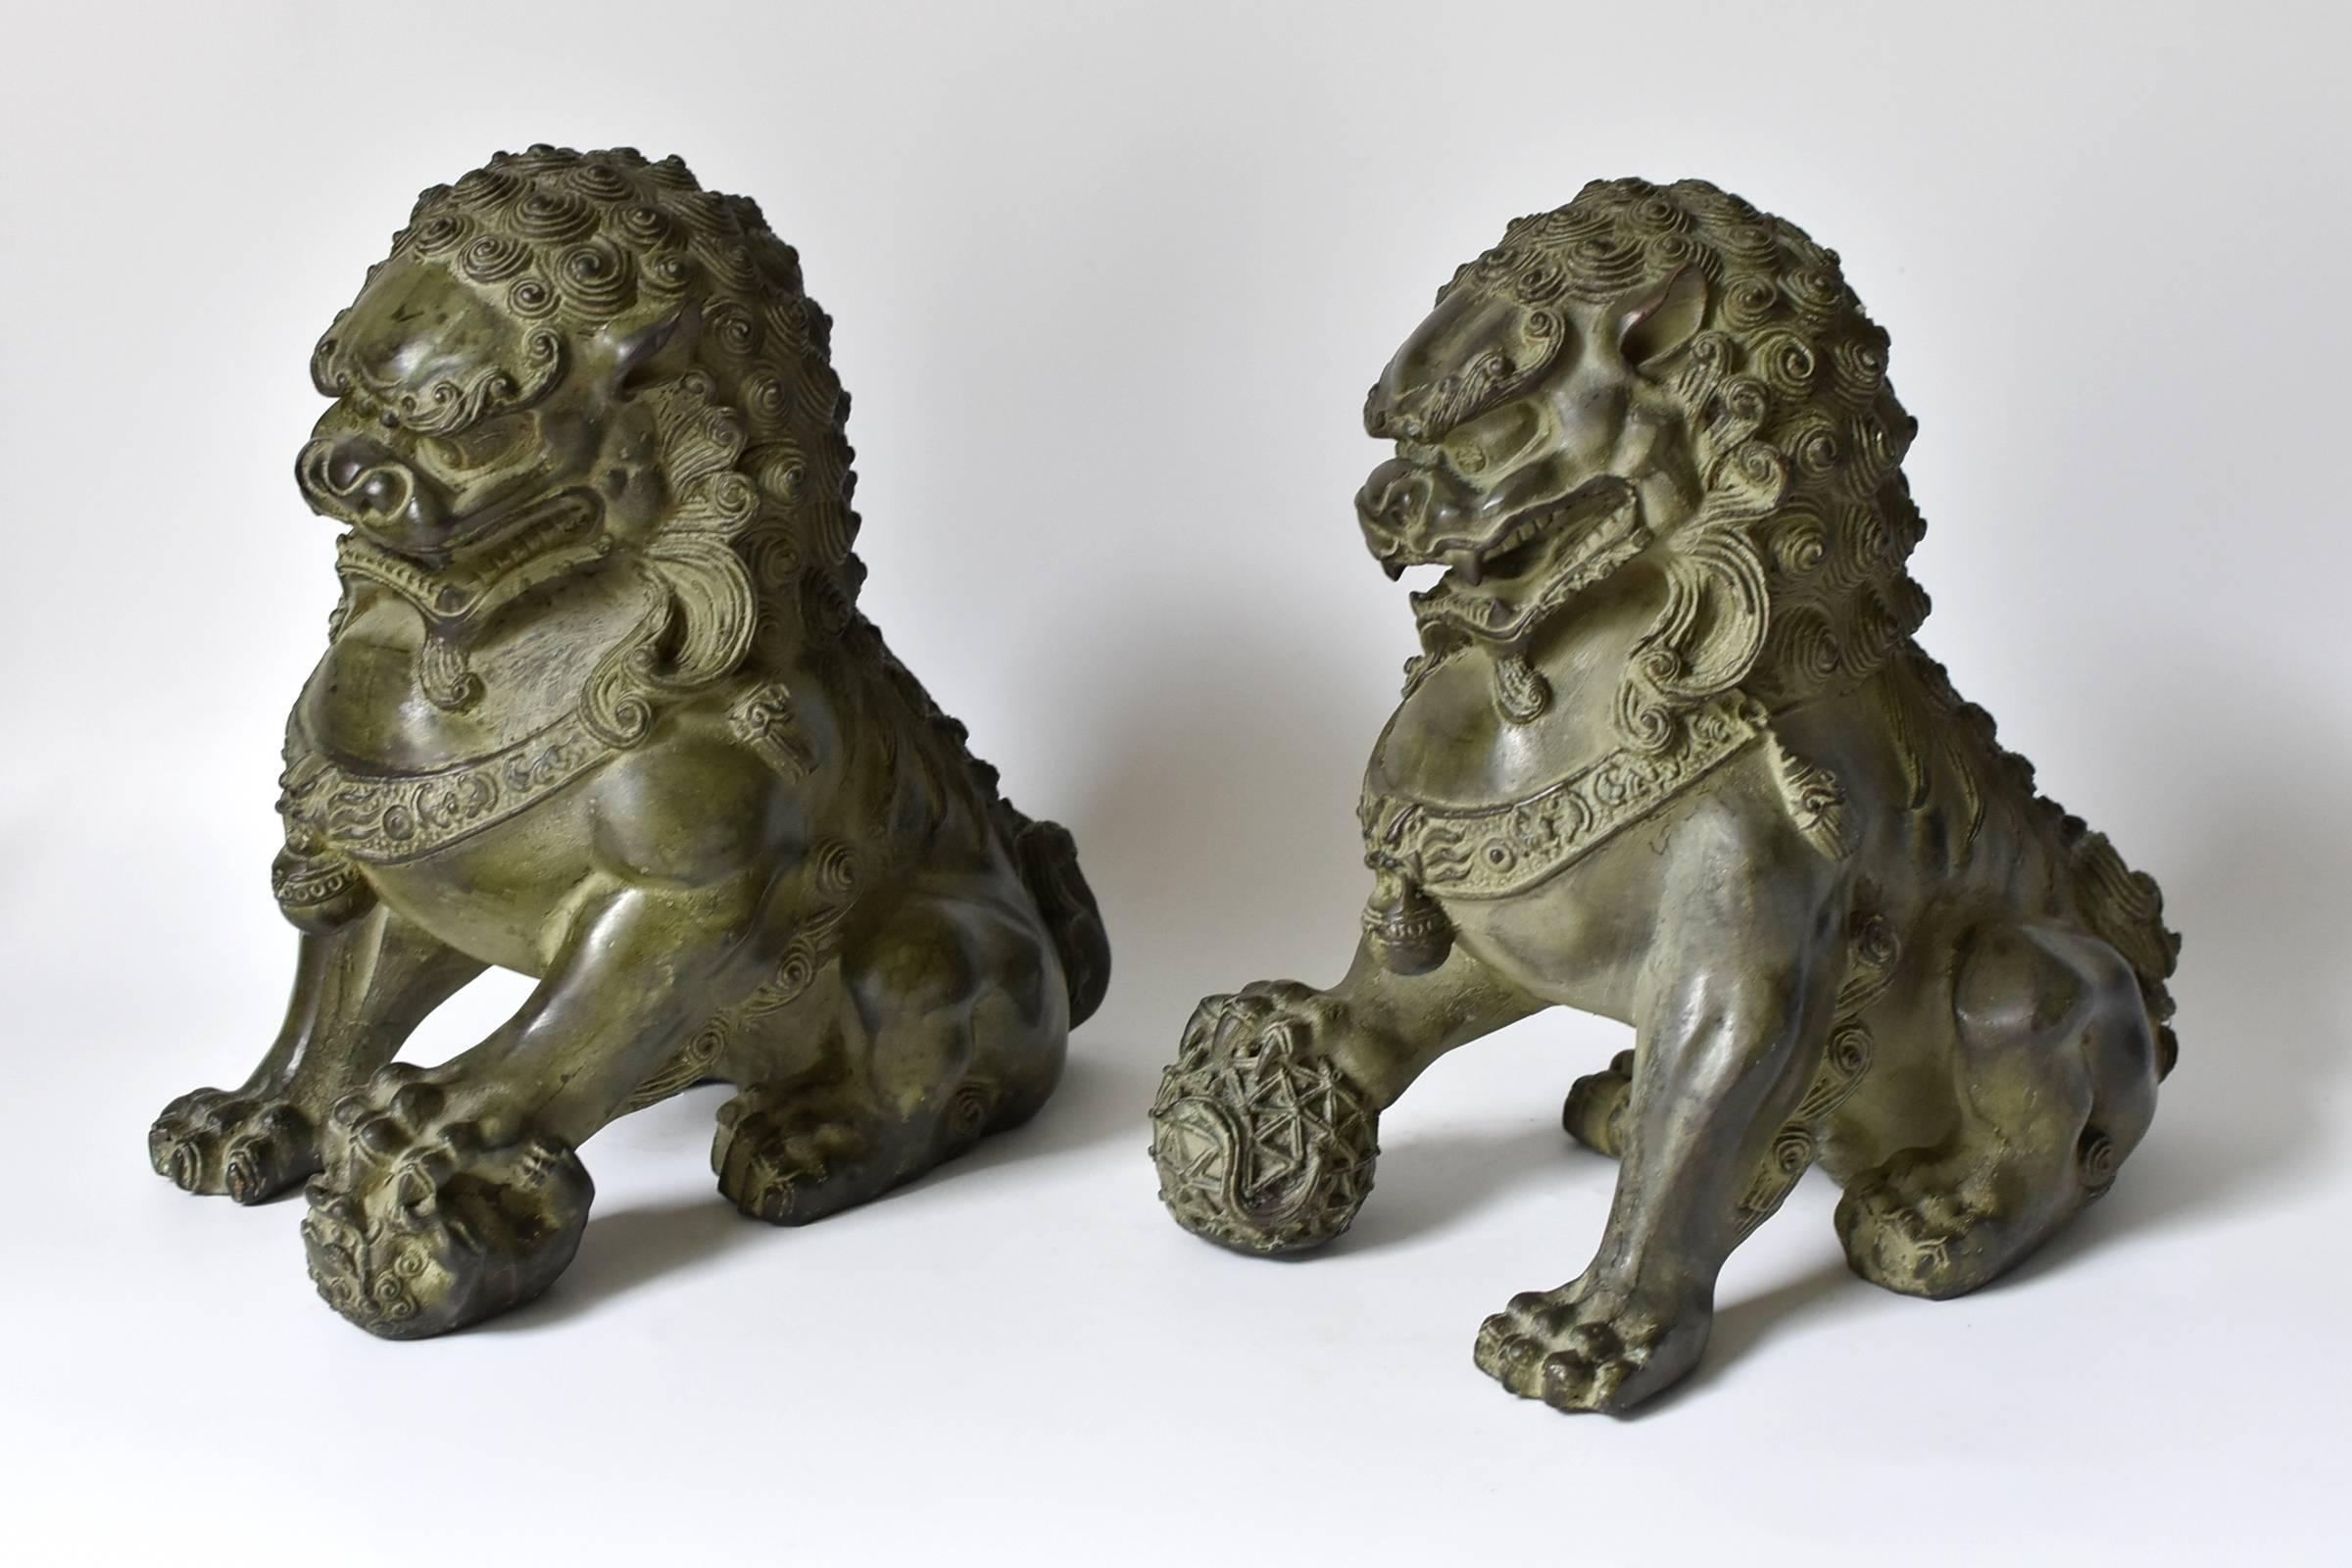 This is a pair fantastic, larger than usual foo dogs. These pieces are very fine with every parts of the foo dogs well defined. The male holds a globe firmly in his paw, symbolizing the universe, while the female holds a cub in hers, symbolizing